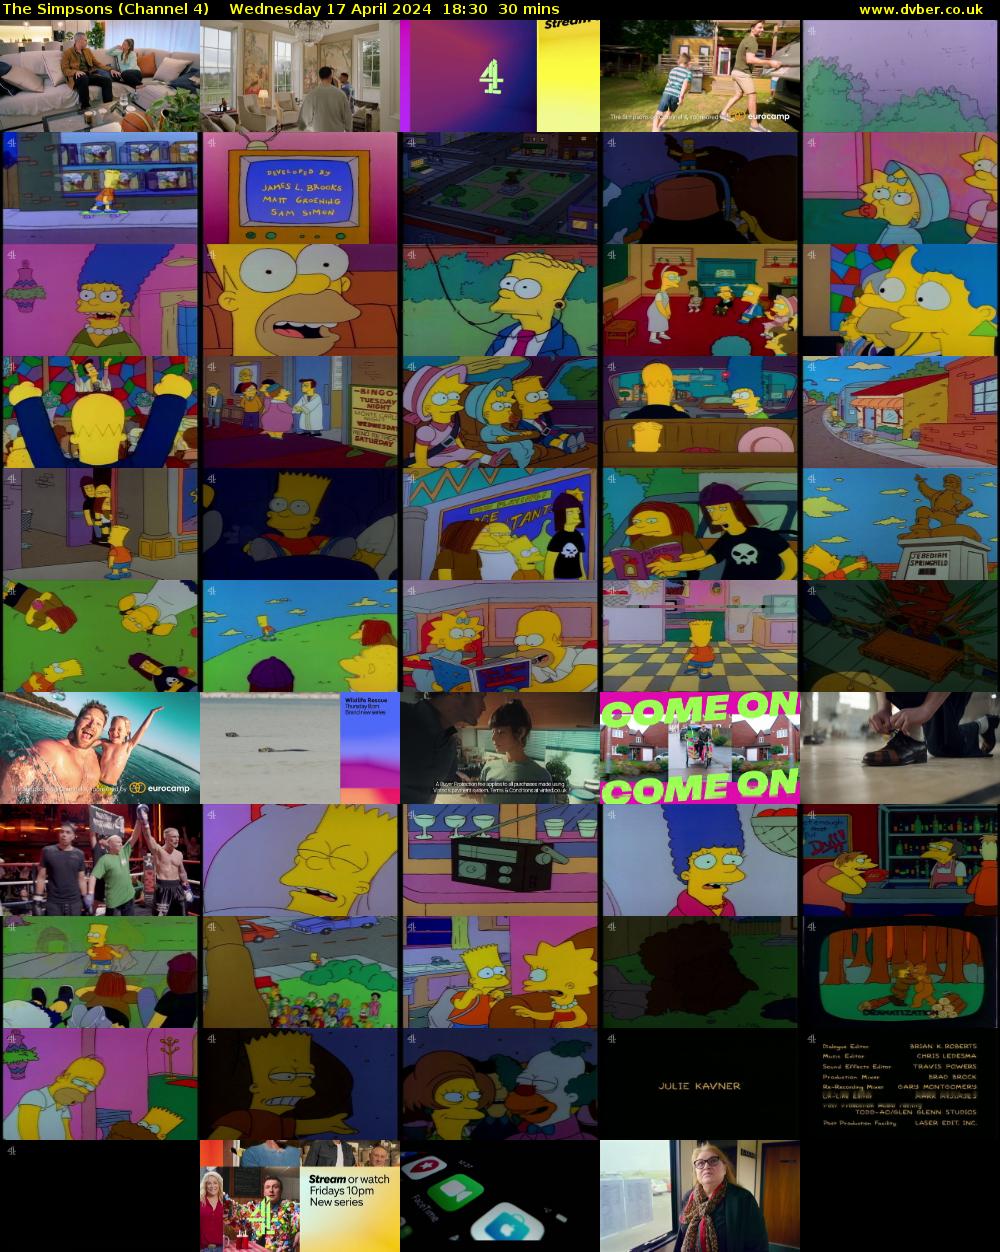 The Simpsons (Channel 4) Wednesday 17 April 2024 18:30 - 19:00